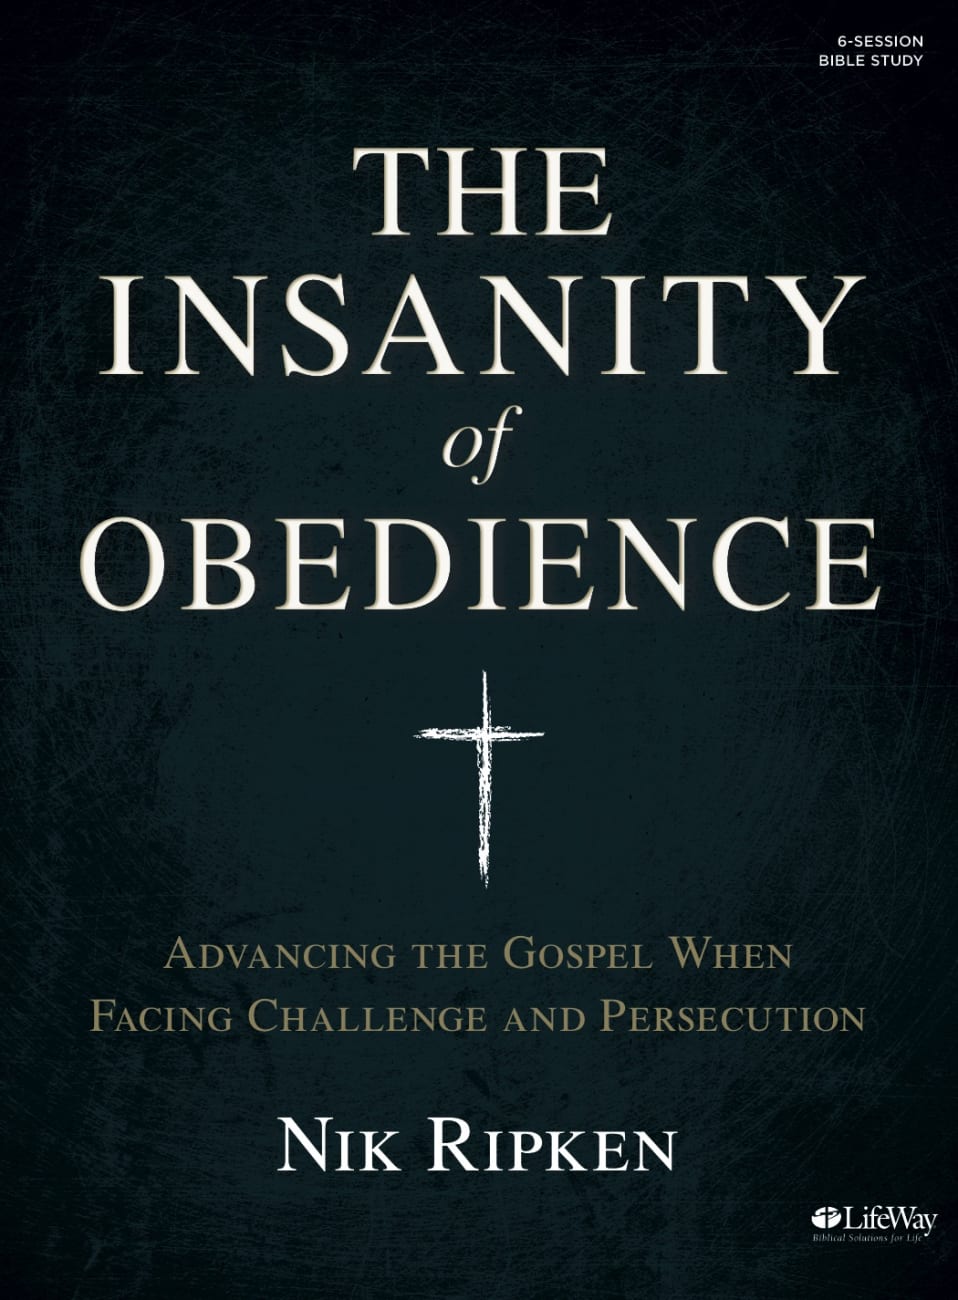 The Insanity of Obedience (Bible Study Book) Paperback